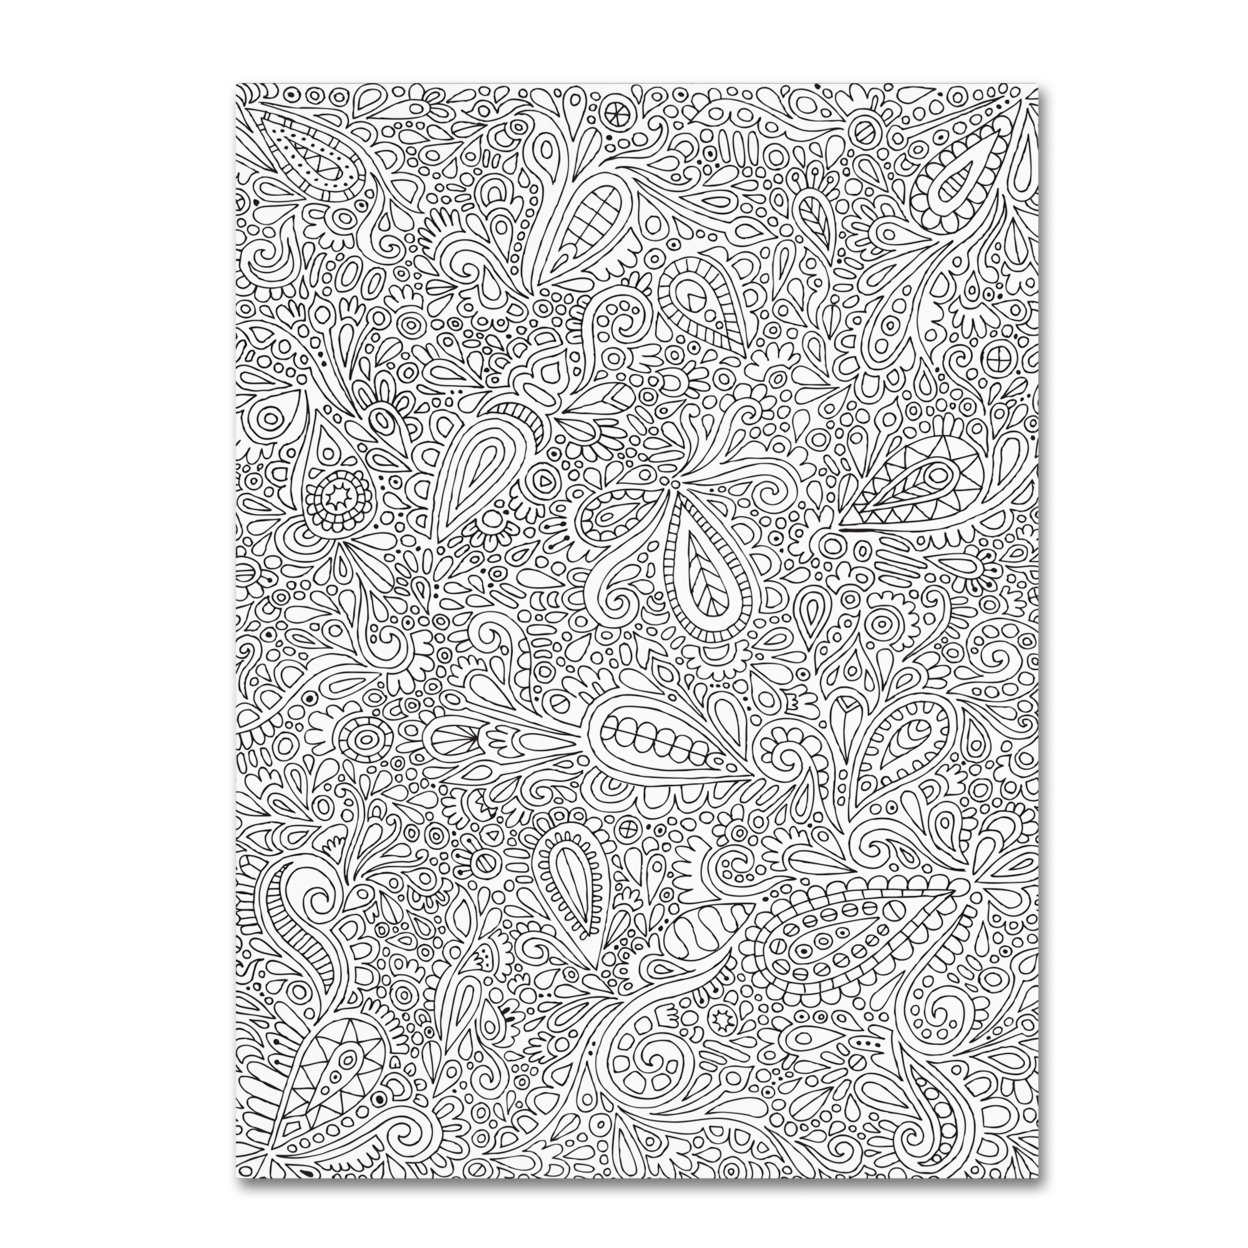 Hello Angel 'Oodles Of Doodles' Canvas Wall Art 35 X 47 Inches